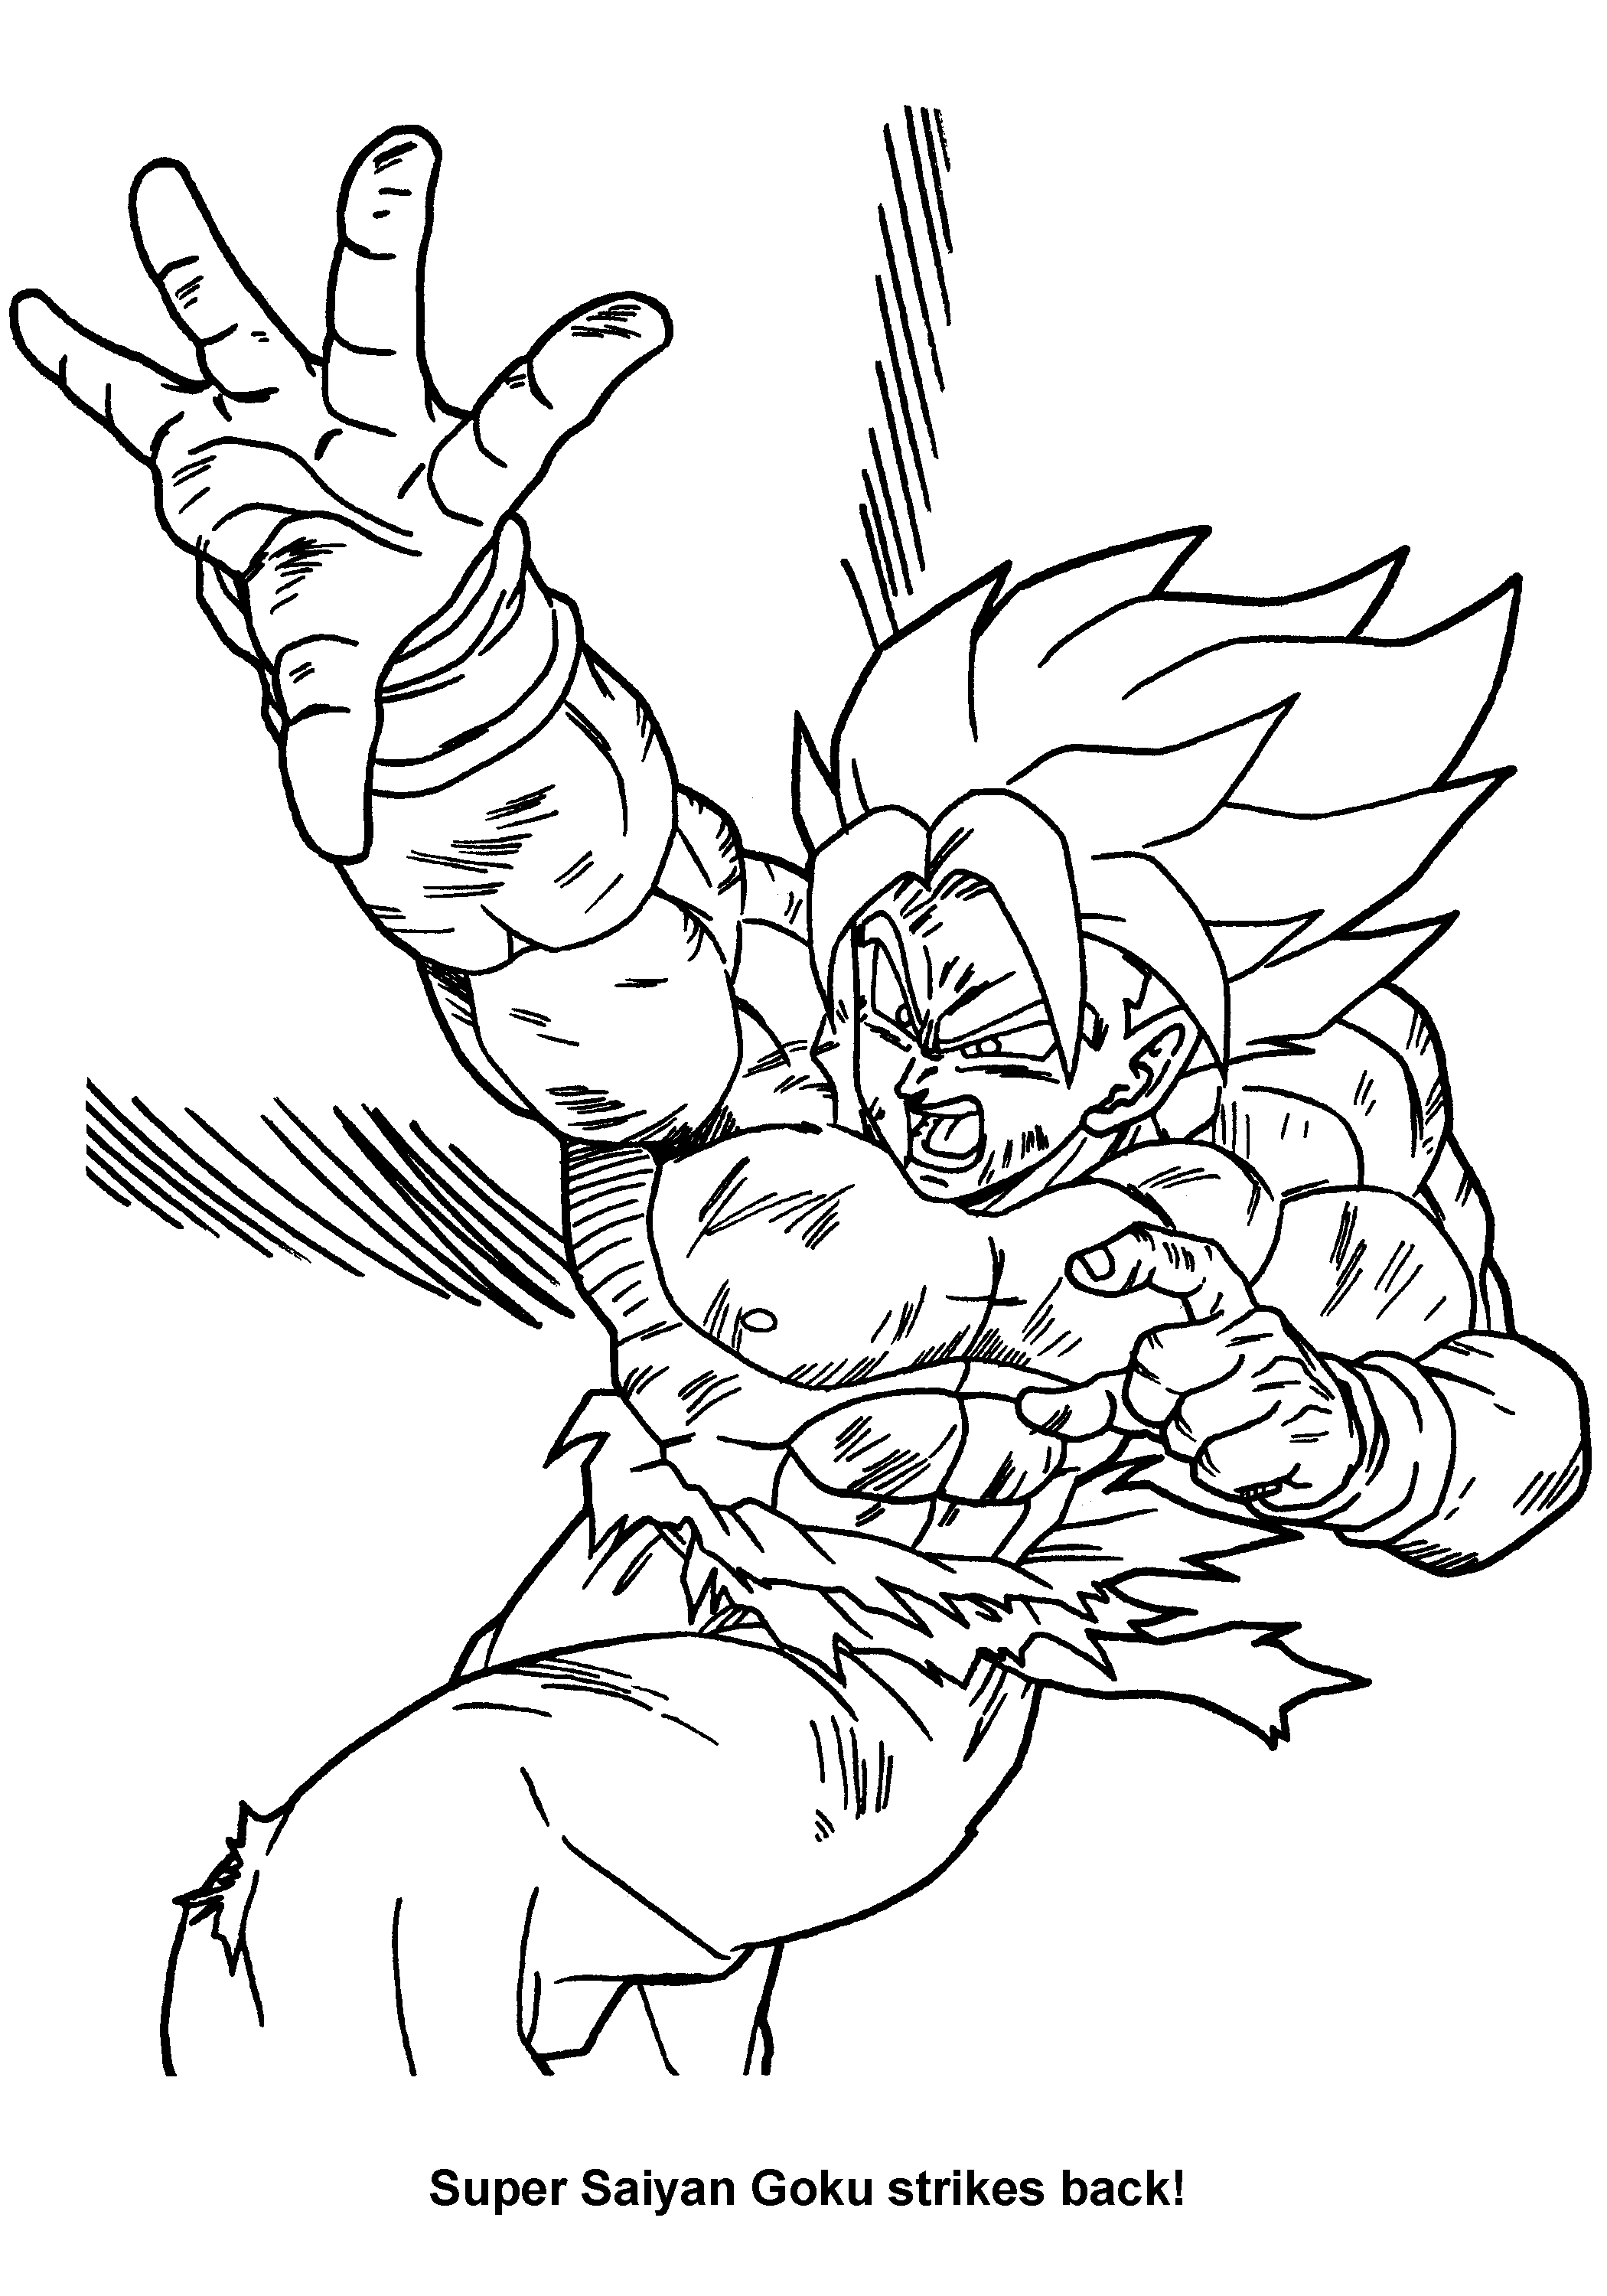 Dragon Ball Z  Dragon coloring page, Coloring pages, Cartoon